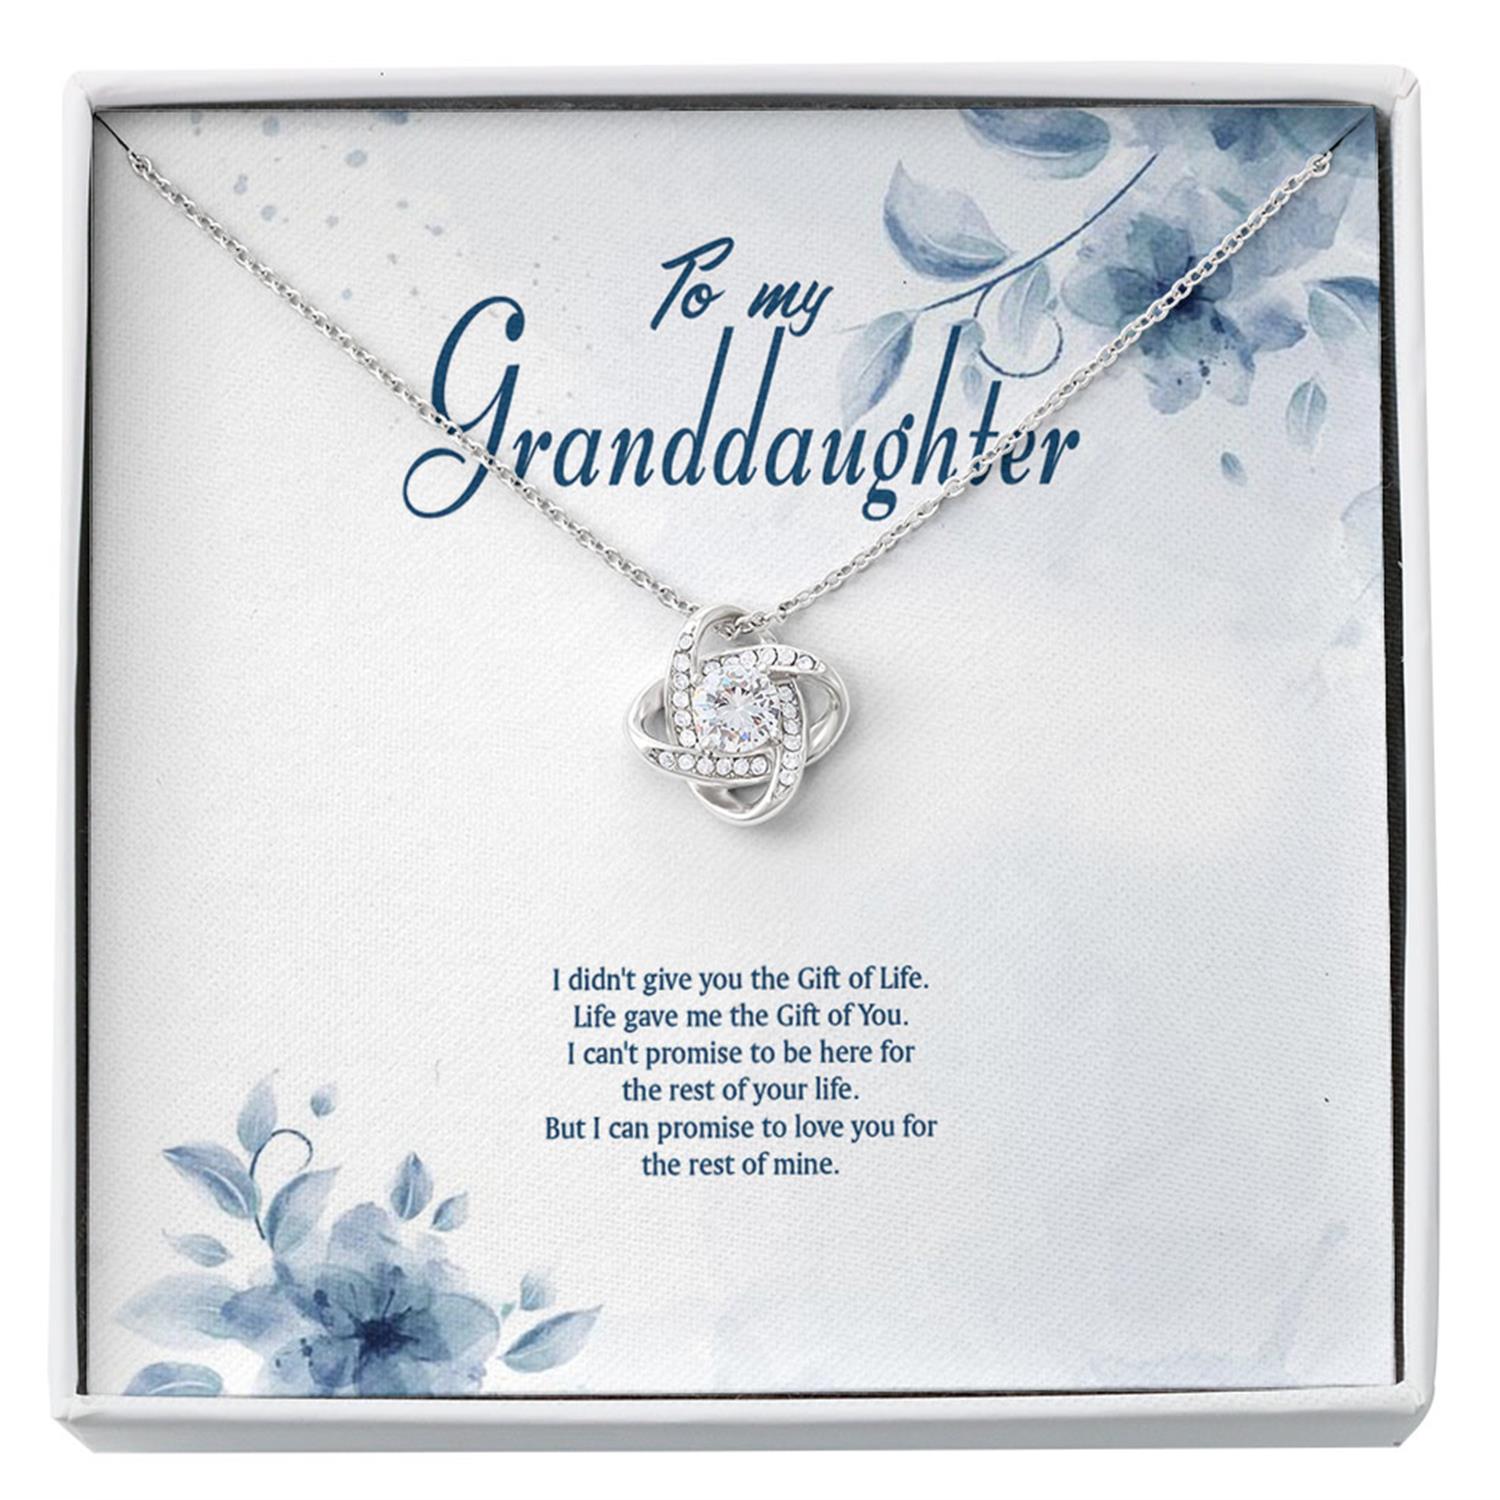 Granddaughter Necklace Gifts From Grandma Grandmother Grandfather Custom Necklace